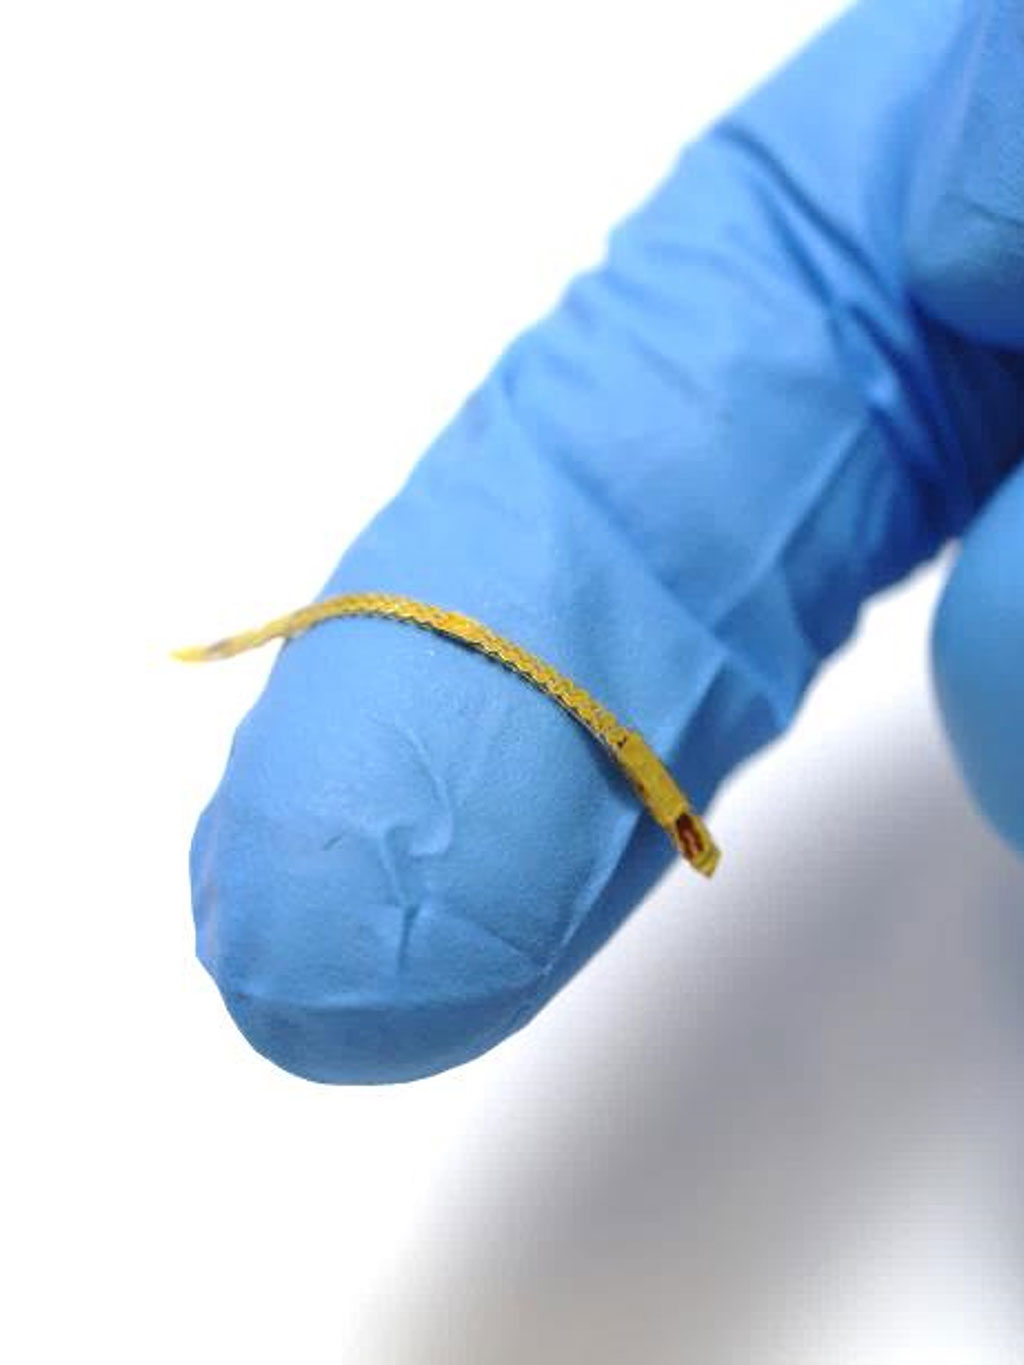 Image: Smart stent can continuously monitor arterial pressure, pulse, and flow (Photo courtesy of Georgia Institute of Technology)